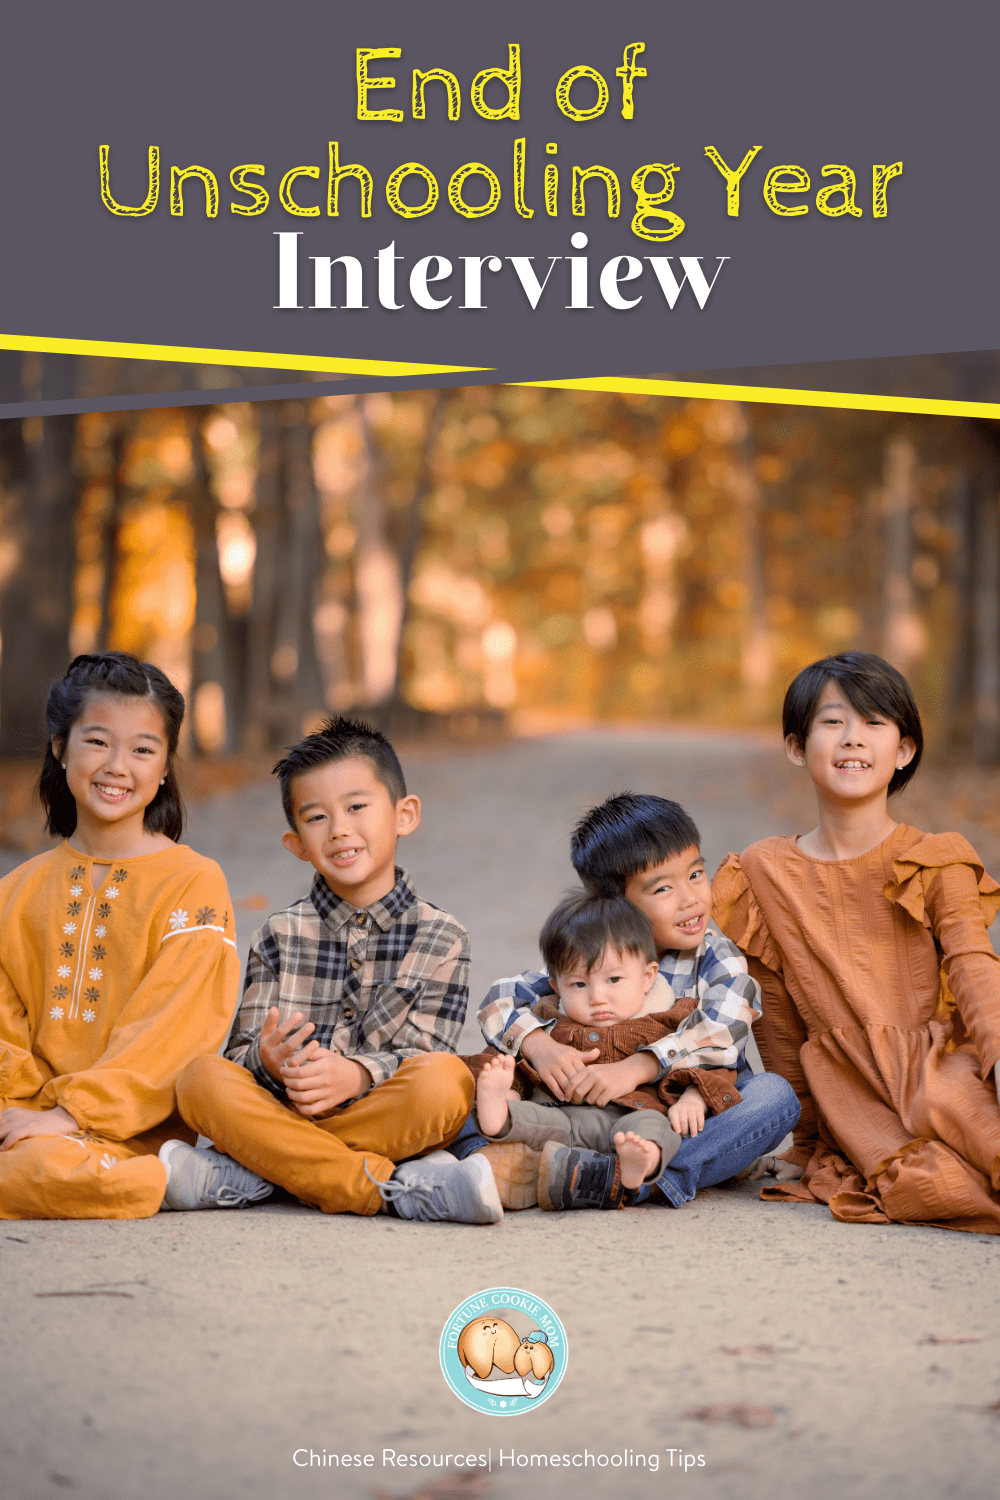 End of the Unschooling Year Interview